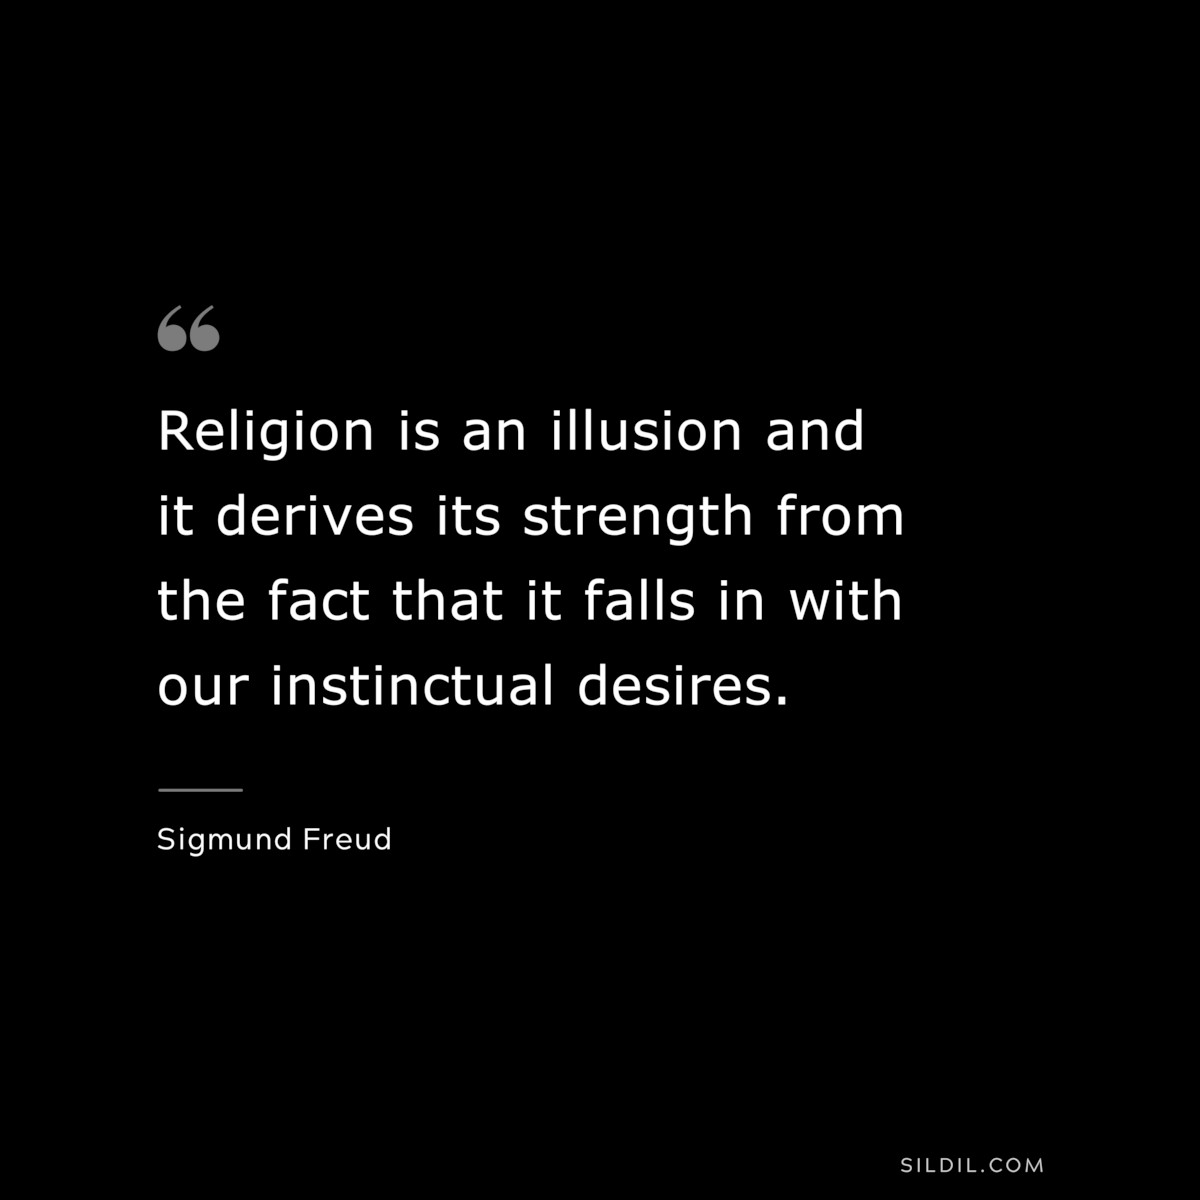 Religion is an illusion and it derives its strength from the fact that it falls in with our instinctual desires. ― Sigmund Frued